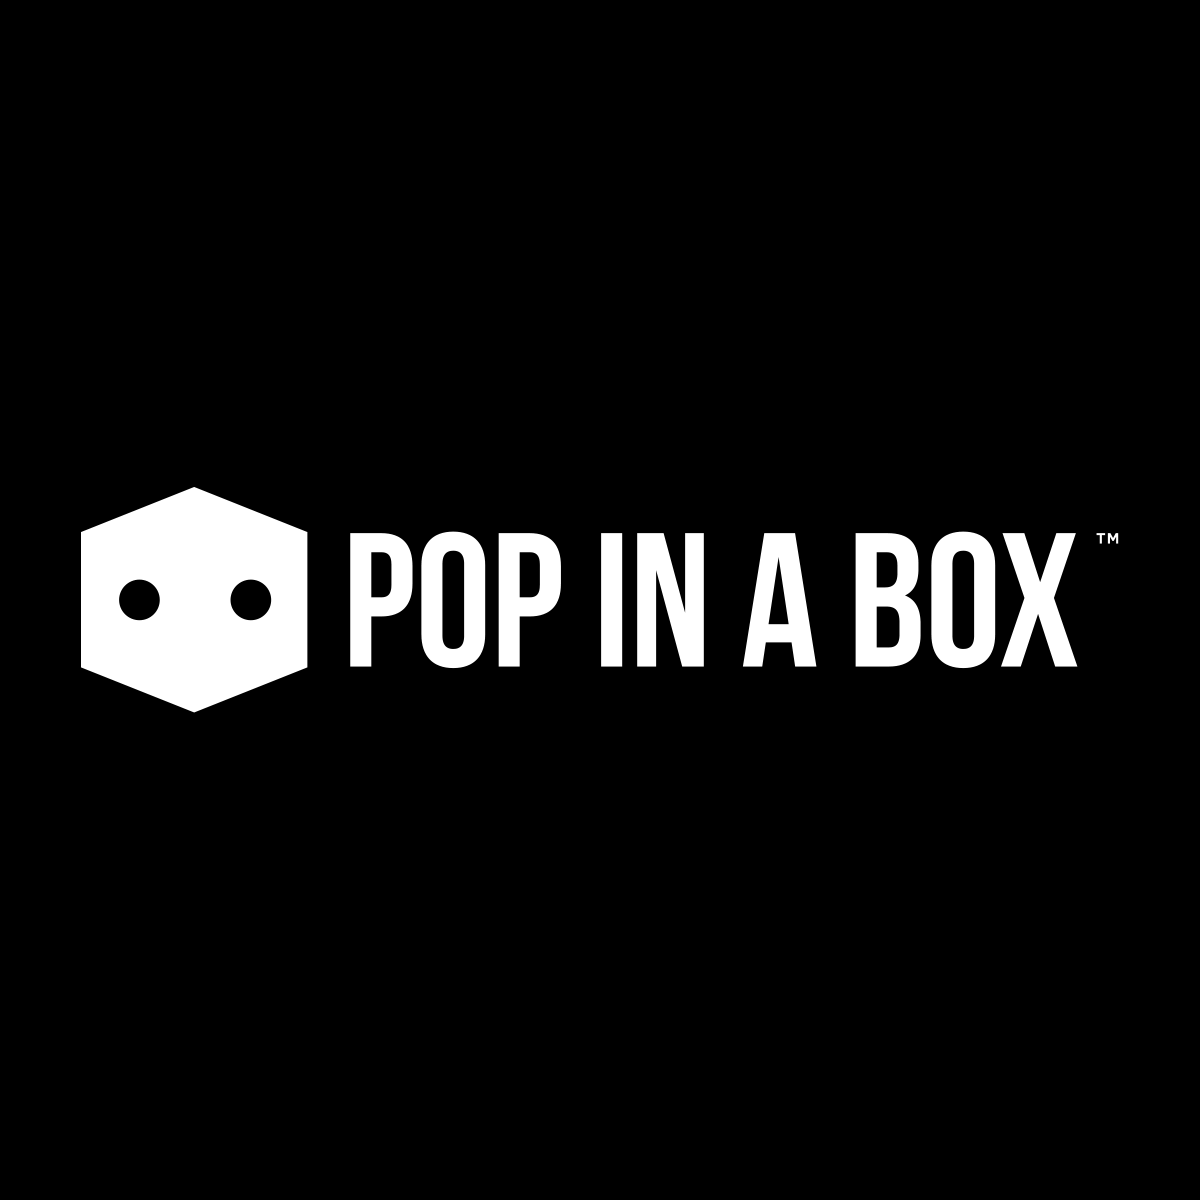 10% Off With Pop In A Box UK Voucher Code